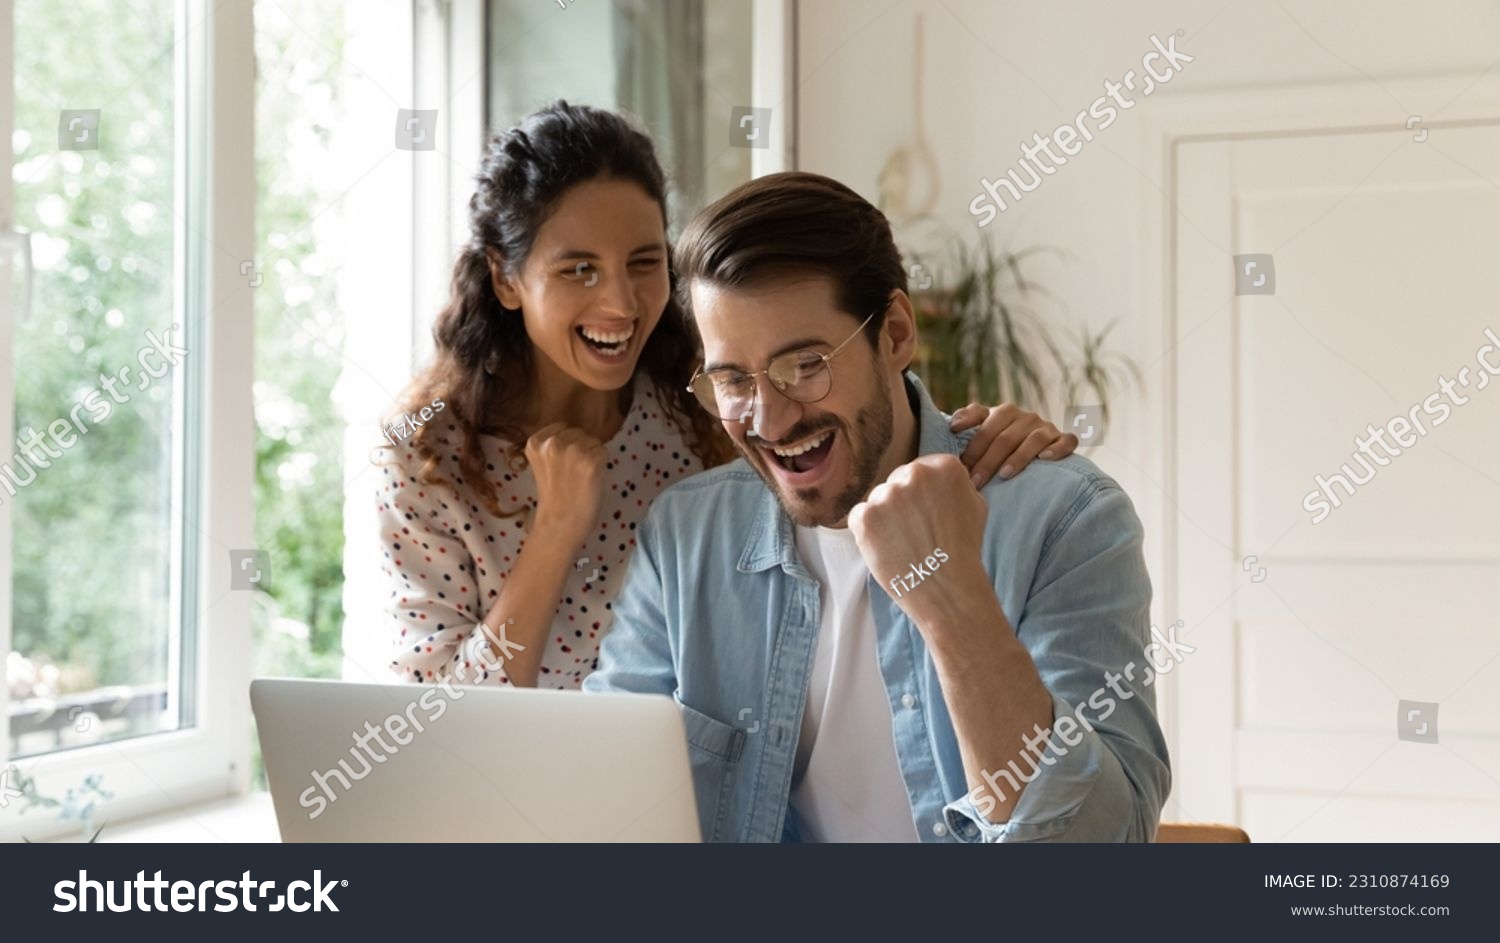 Overjoyed loving young bonding family couple looking at computer screen, getting email with amazing good news, celebrating online lottery betting gambling giveaway win, internet success concept. #2310874169